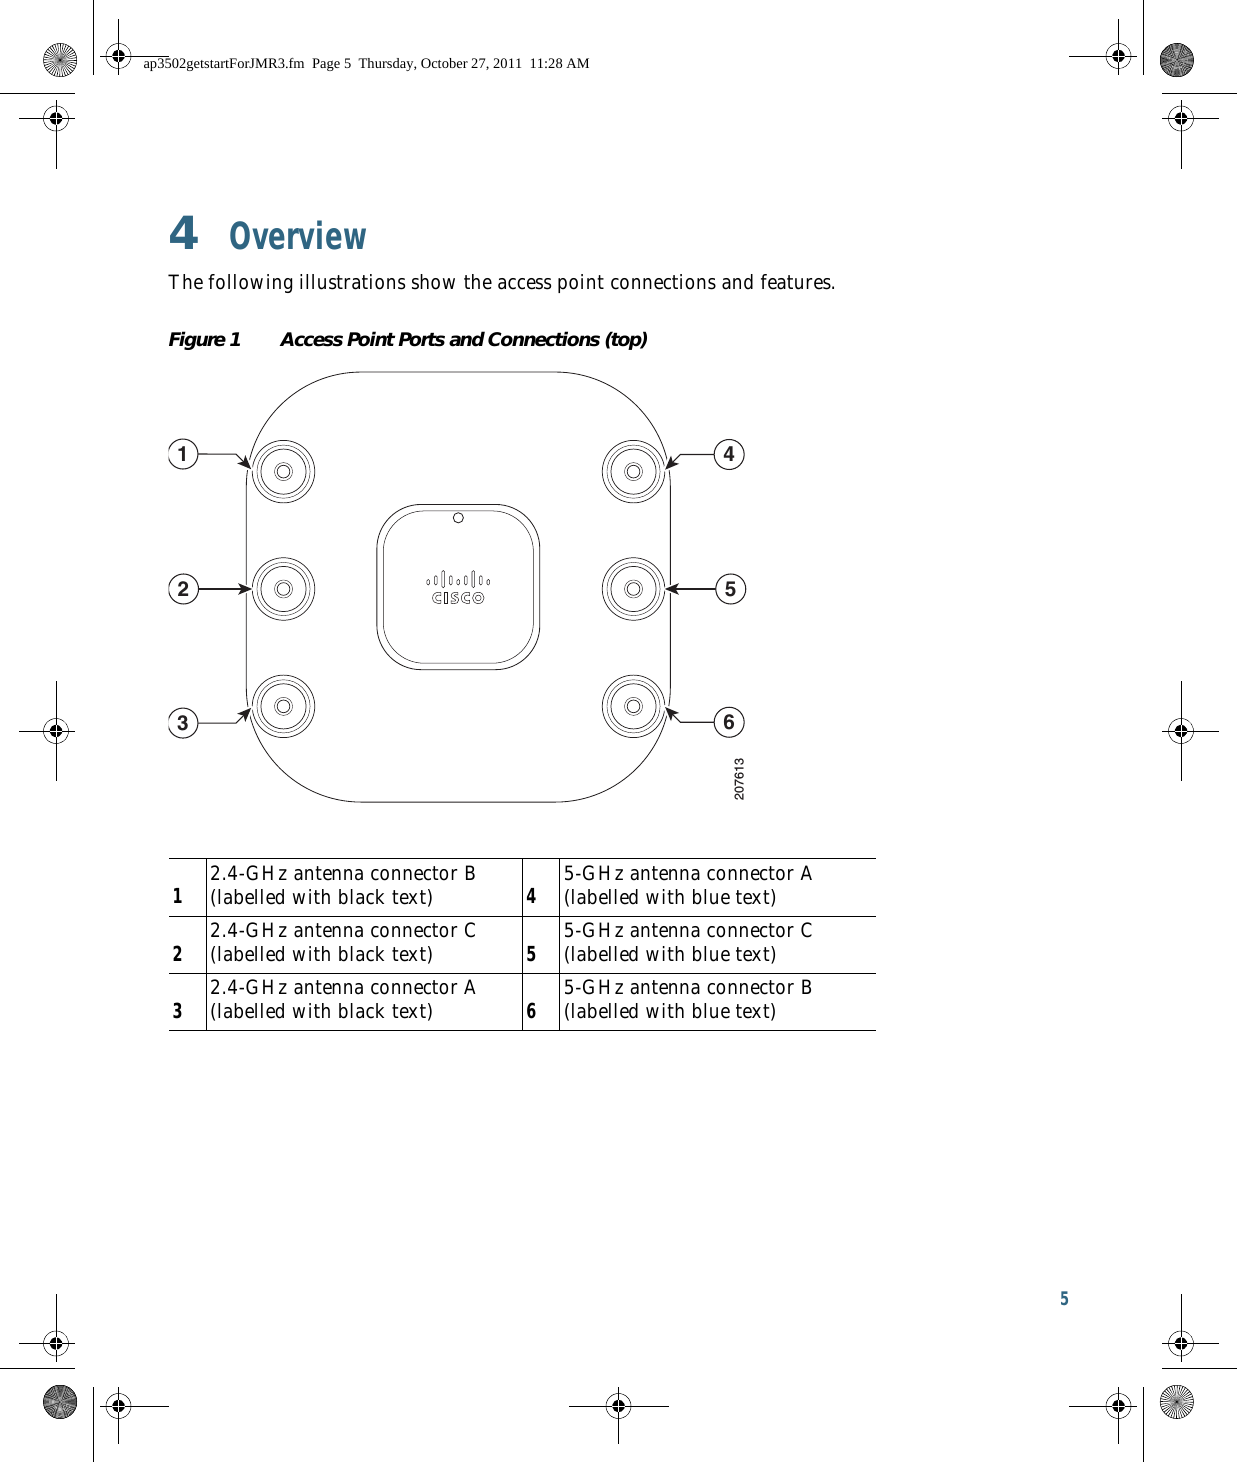 5 4  OverviewThe following illustrations show the access point connections and features. Figure 1 Access Point Ports and Connections (top)12.4-GHz antenna connector B (labelled with black text) 45-GHz antenna connector A (labelled with blue text)22.4-GHz antenna connector C (labelled with black text) 55-GHz antenna connector C (labelled with blue text)32.4-GHz antenna connector A (labelled with black text) 65-GHz antenna connector B (labelled with blue text)207613523164ap3502getstartForJMR3.fm  Page 5  Thursday, October 27, 2011  11:28 AM